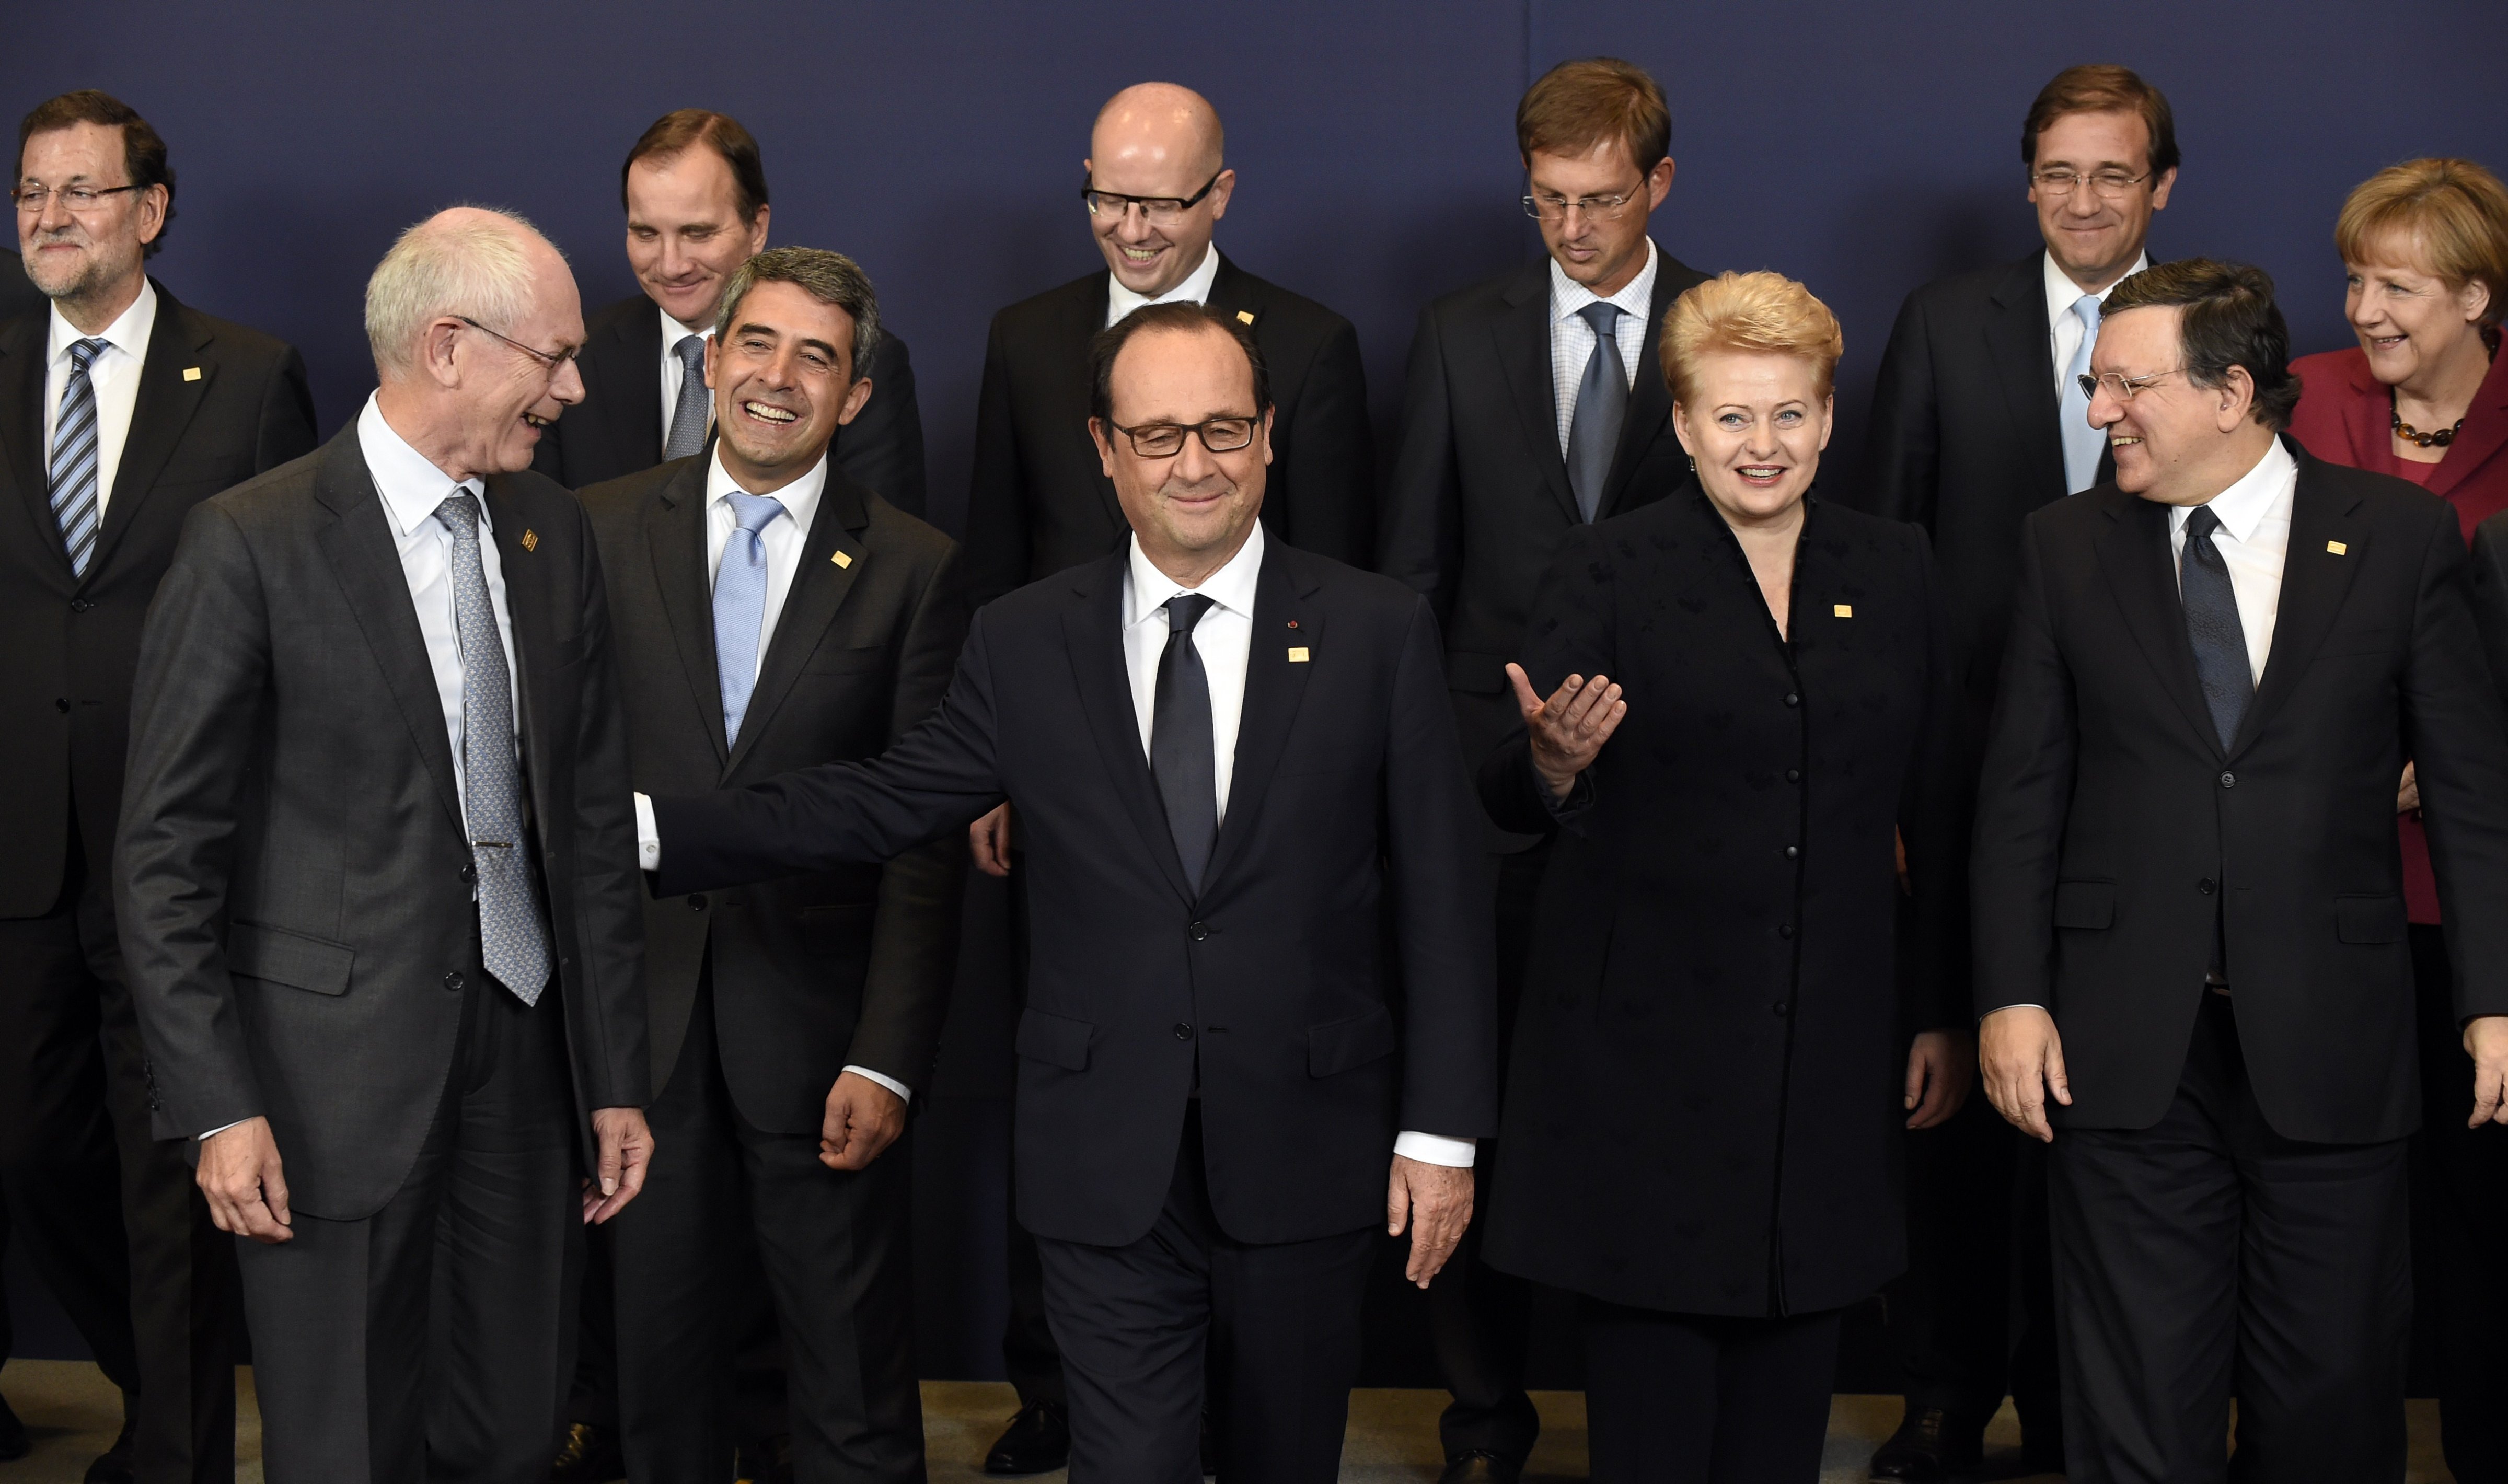 European heads of state and government (from back left) Spanish Prime Minister Mariano Rajoy, Swedish Prime Minister Stefan Loefven, Czech Prime Minister Bohuslav Sobotka, Slovenian Prime Minister Miro Cerar, Portuguese Prime Minister Pedro Passos Coelho and German Chancellor Angela Merkel (from front left) European Council President Herman Van Rompuy, Bulgarian President  Rosen Plevneliev, French President  Francois Hollande, Lithuanian President Dalia Grybauskaite and European Commission President Jose Manuel Barroso talk before a family photo during a European Union summit at the EU headquarters in Brussels on Oct 23, 2014. (JOHN THYS&mdash;AFP/Getty Images)